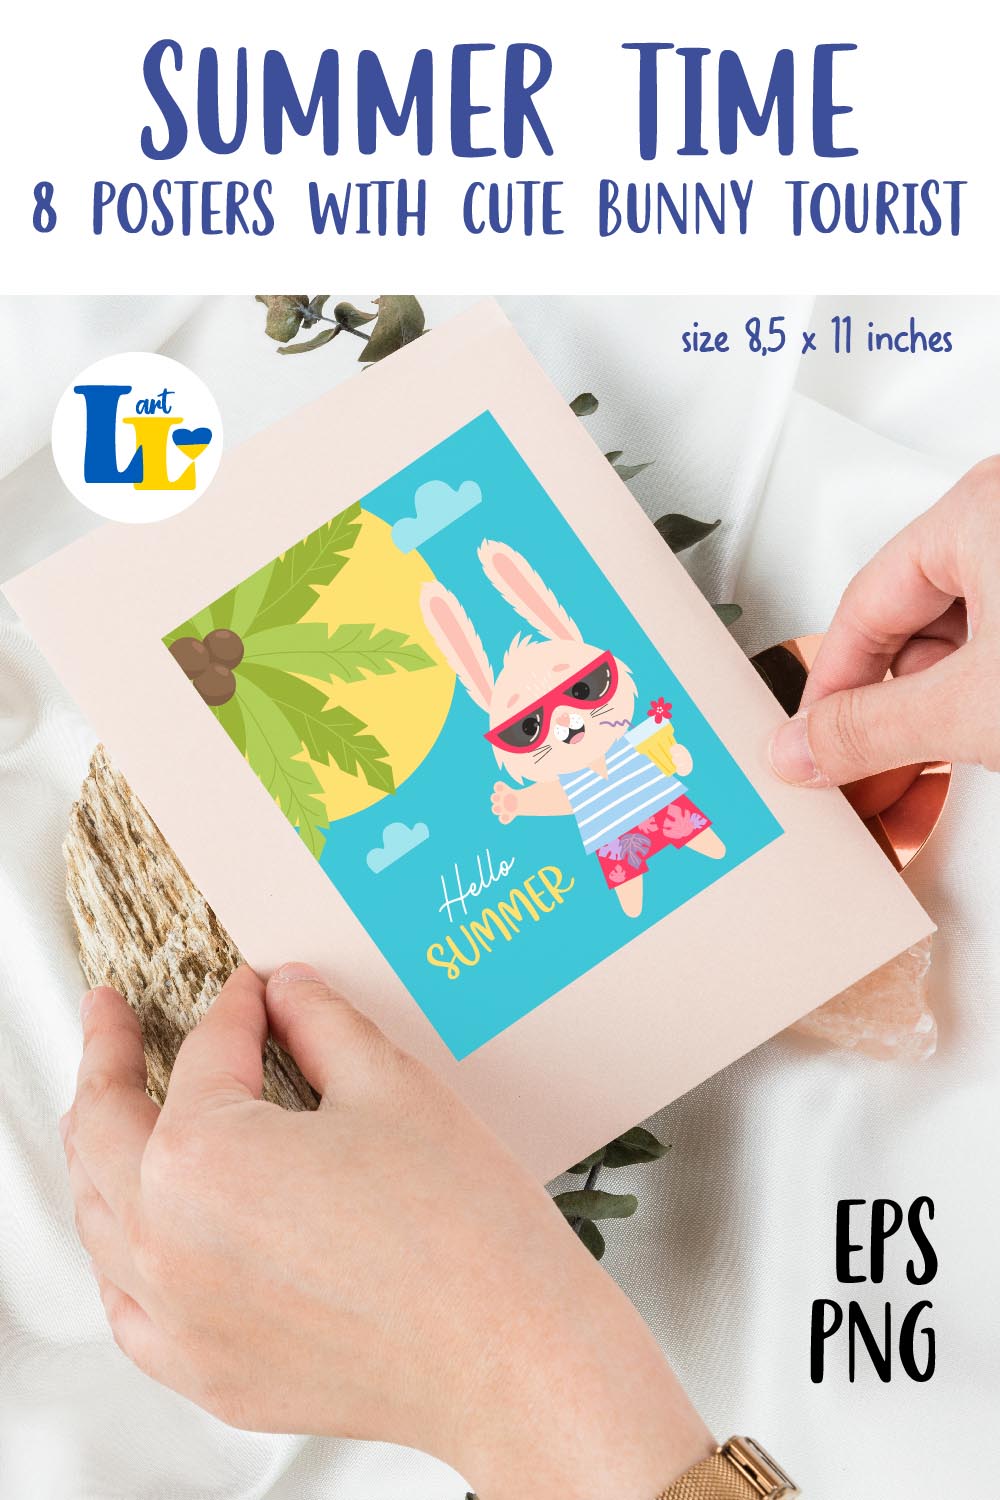 Cute Beach Bunny Tourist Summer Time Posters Pinterest Image.